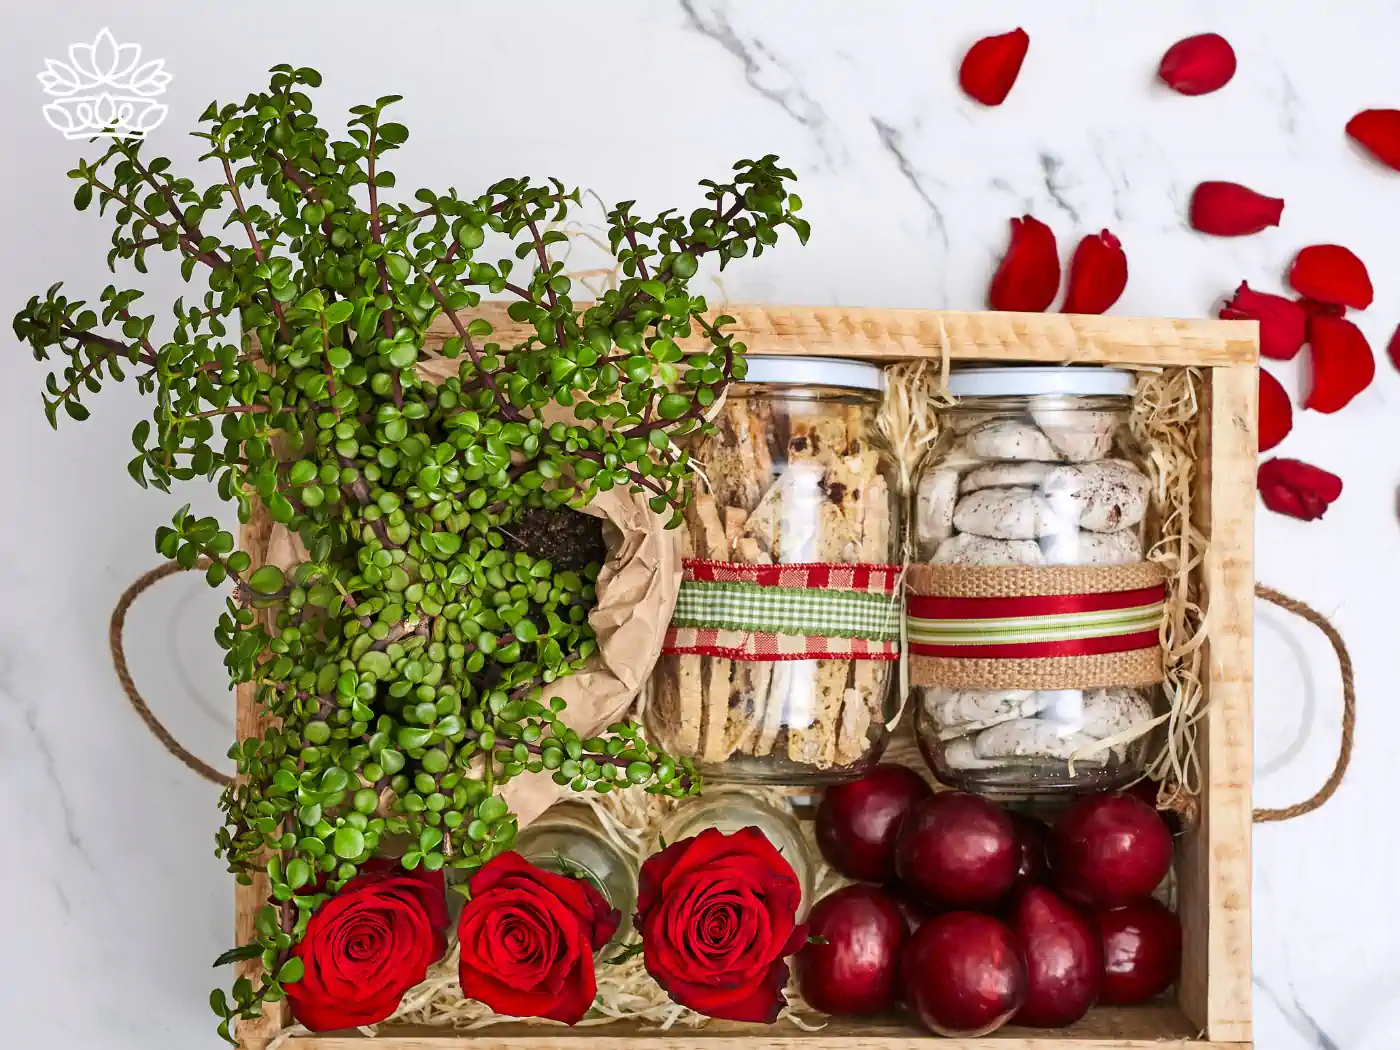 A beautifully arranged gift basket featuring vibrant red roses, fresh plums, a lush green potted plant, and jars filled with cookies and meringues, part of the mental health gift boxes by Fabulous Flowers and Gifts. Expertly assembled to bring joy and uplift spirits, delivered with heartfelt warmth and care.